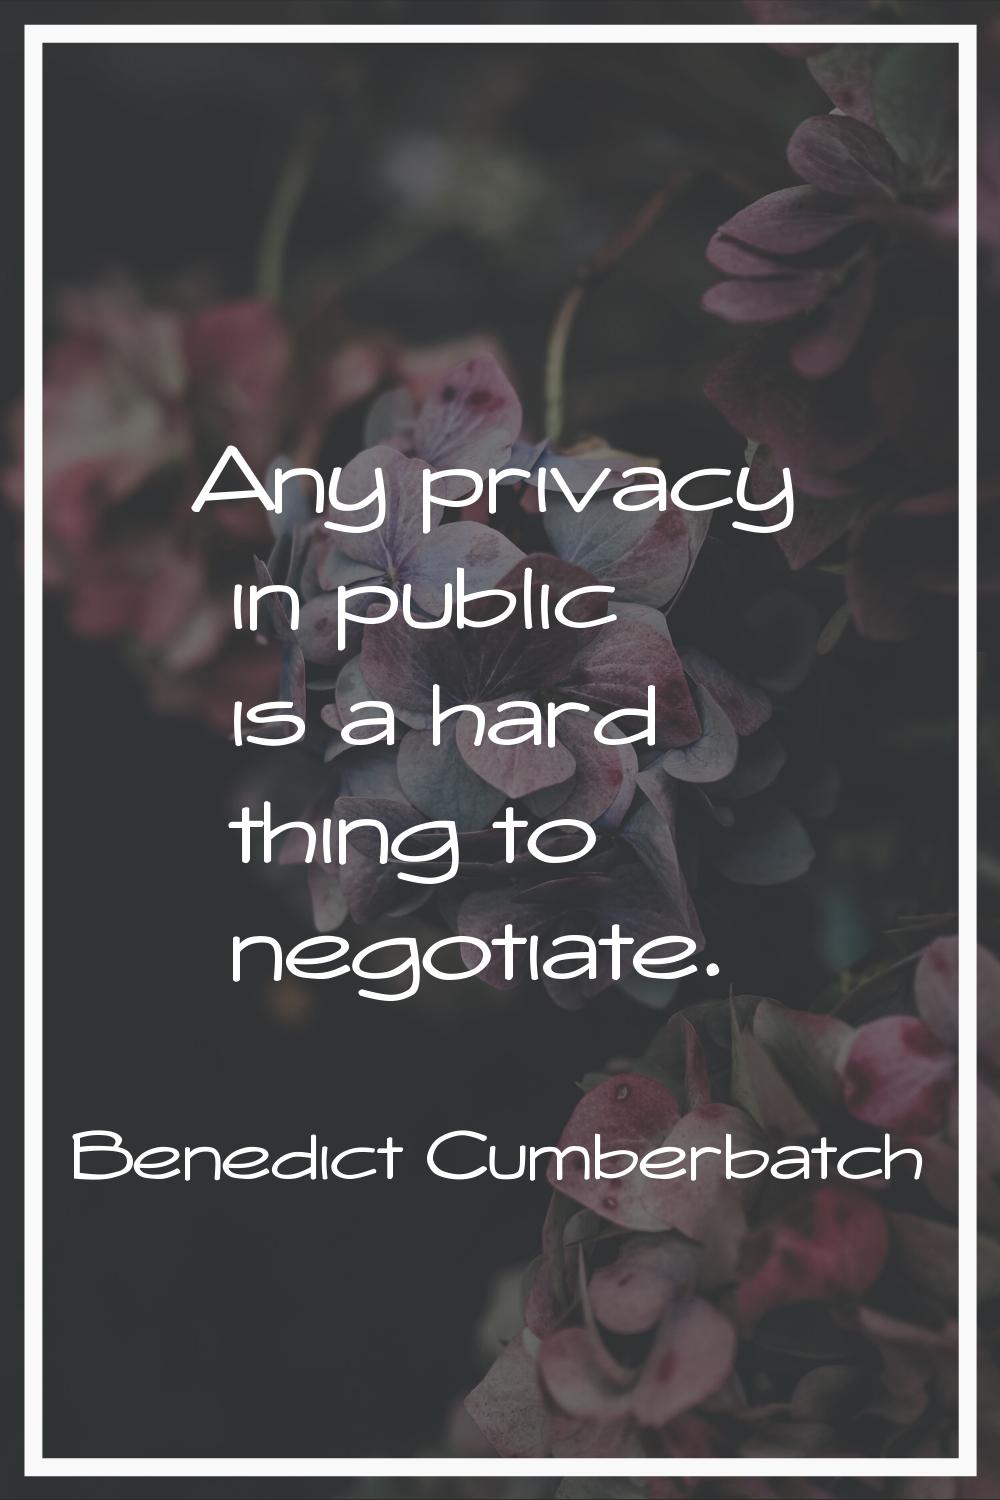 Any privacy in public is a hard thing to negotiate.